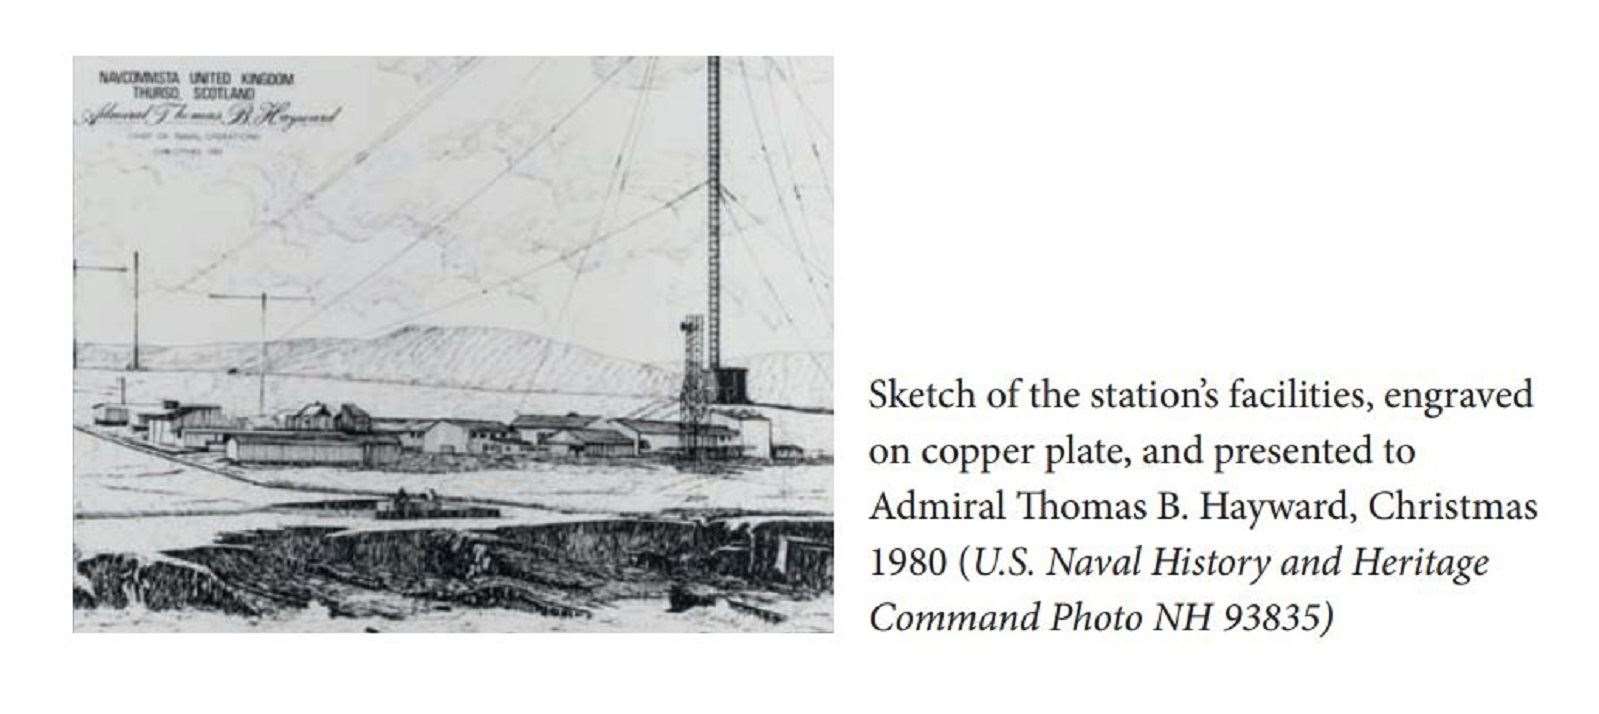 One of the book illustrations shows a drawing of the Thurso base.